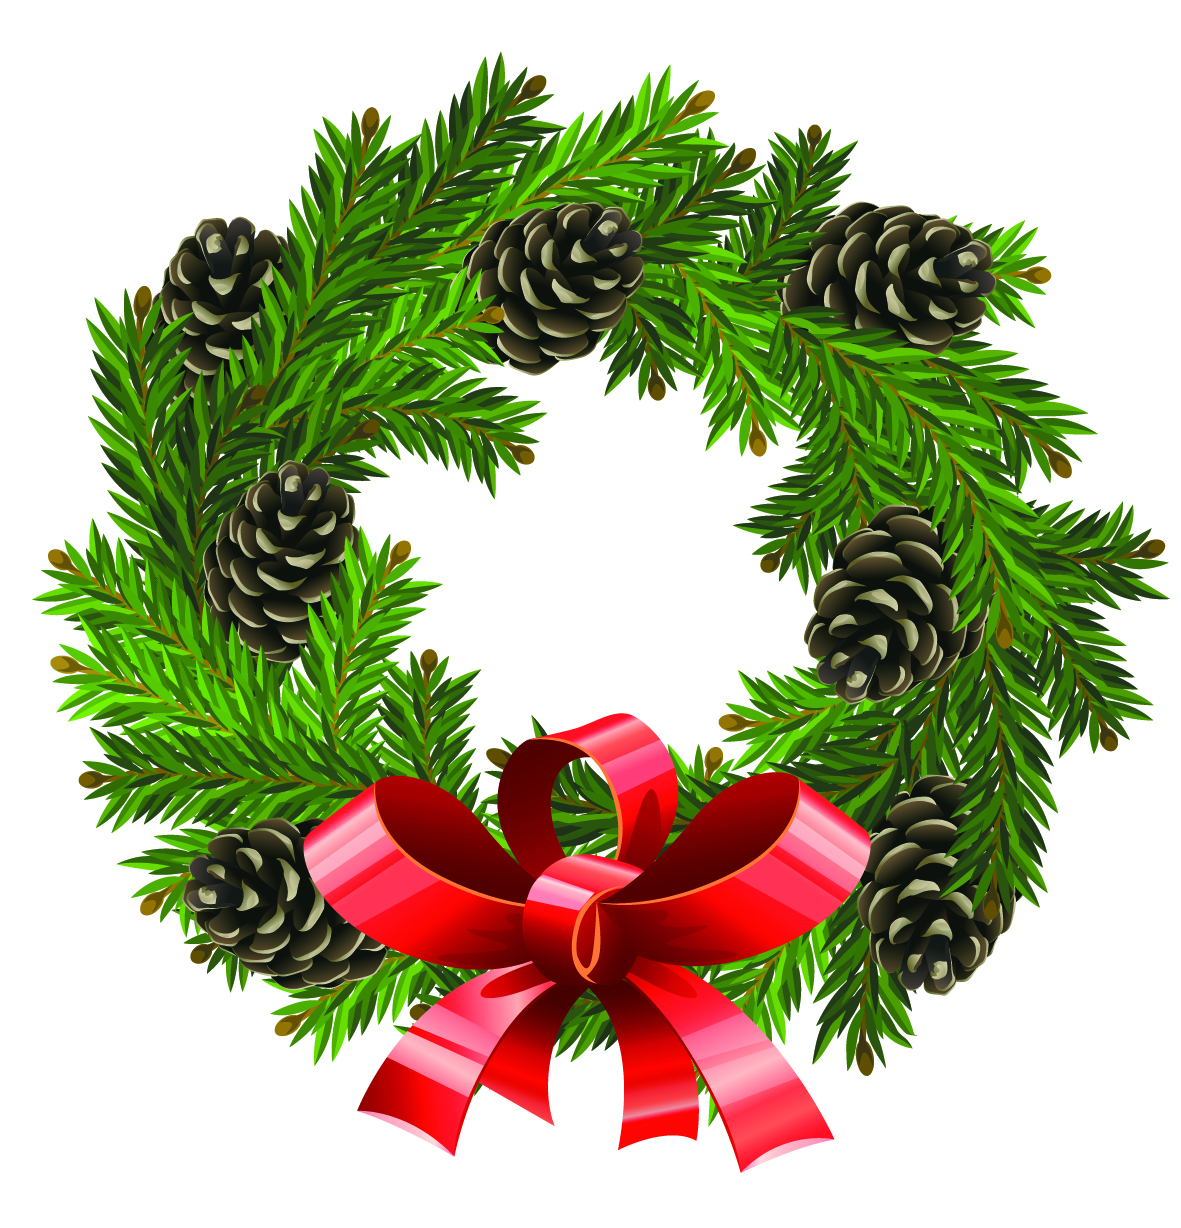 Christmas wreath images free clip art